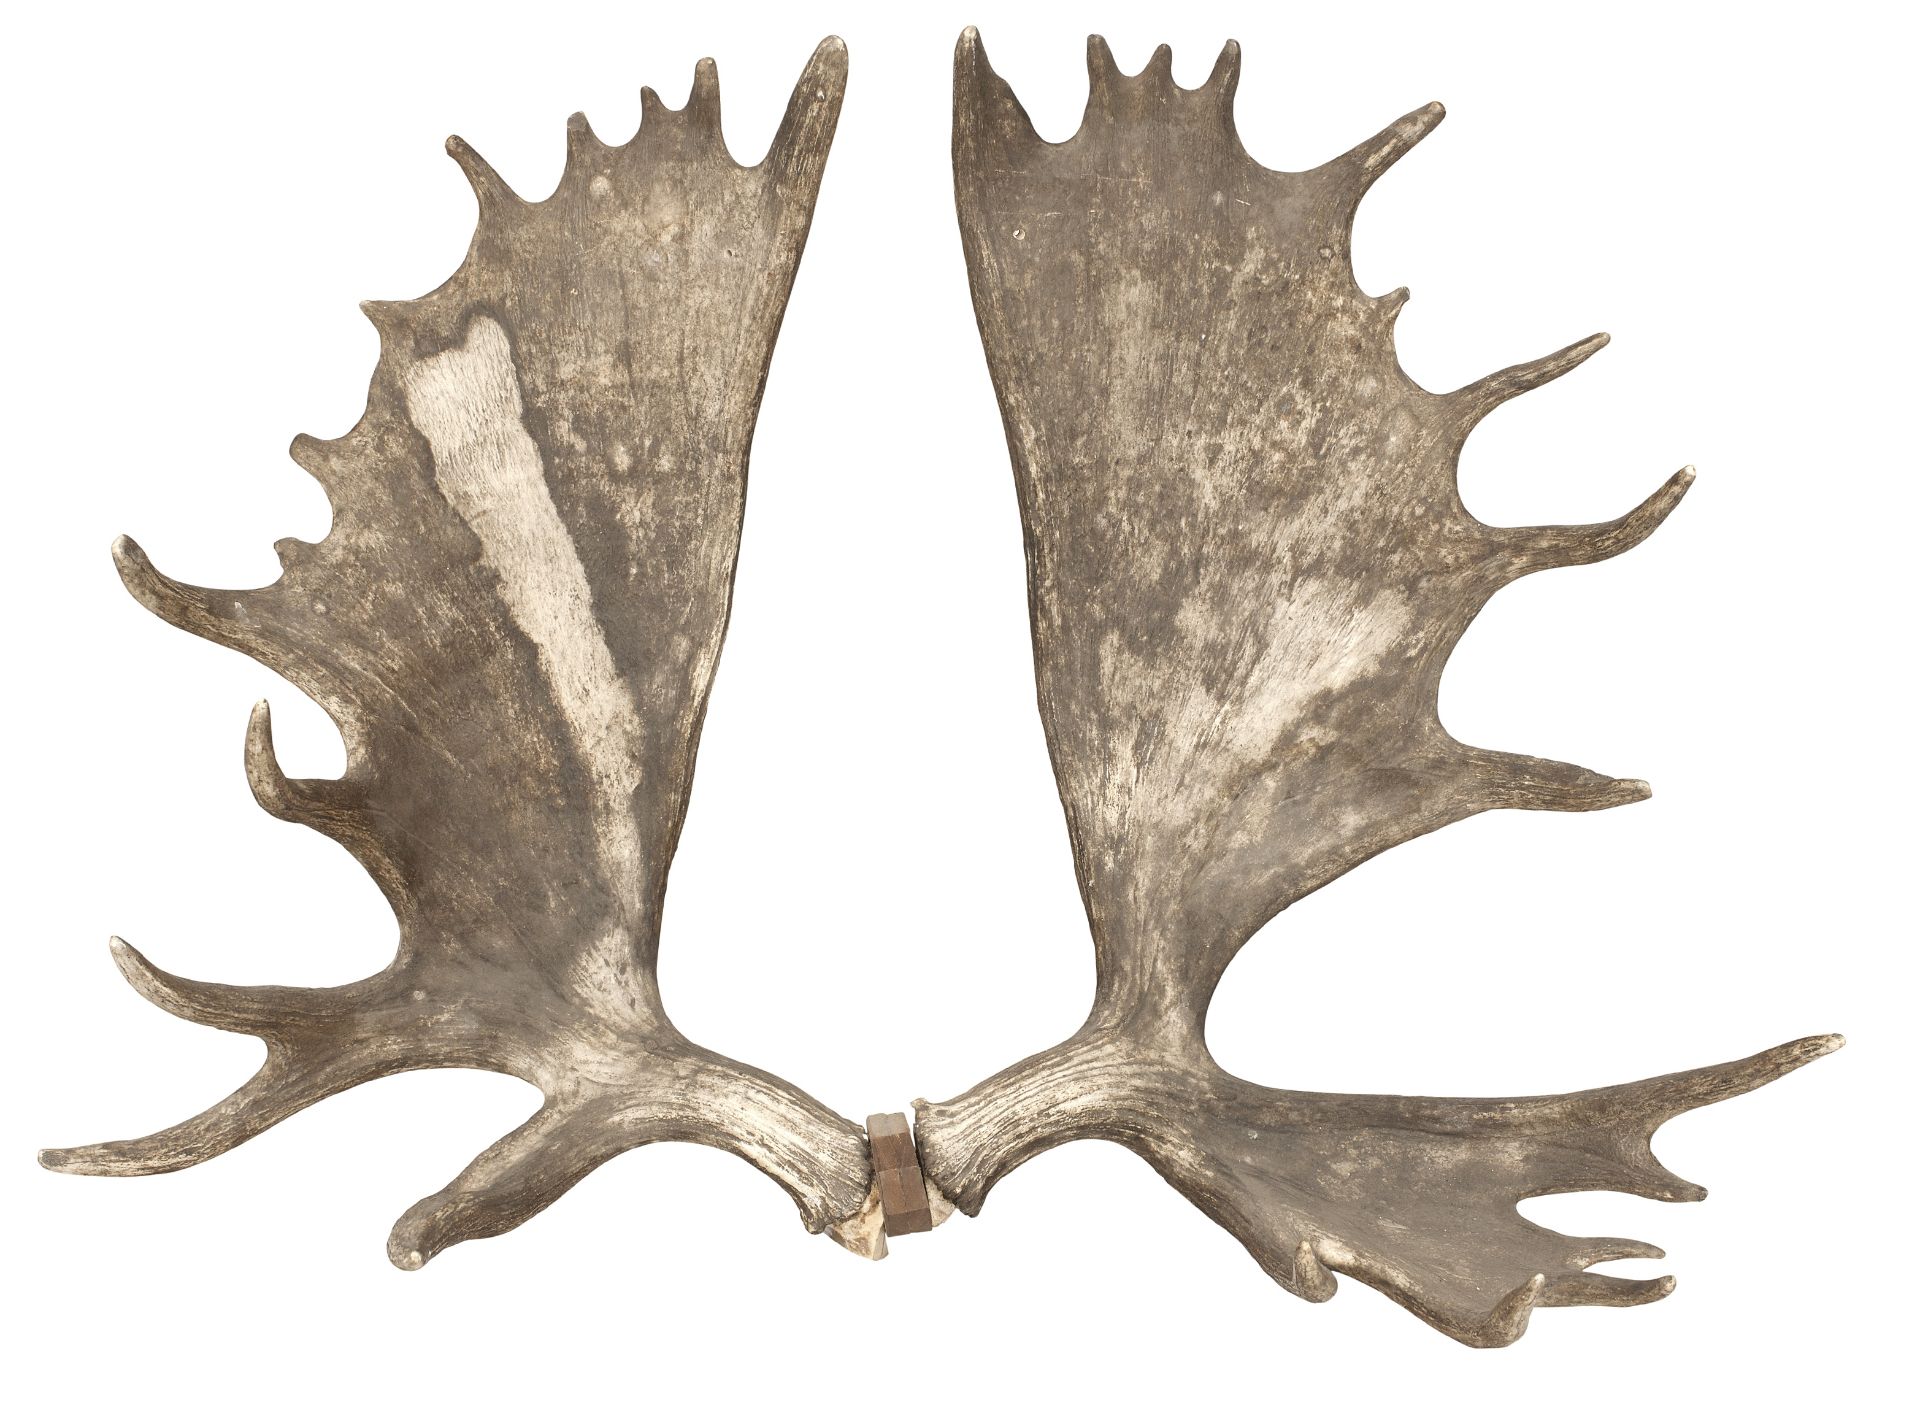 A large set of moose or elk antlers (Alces alces) (2)